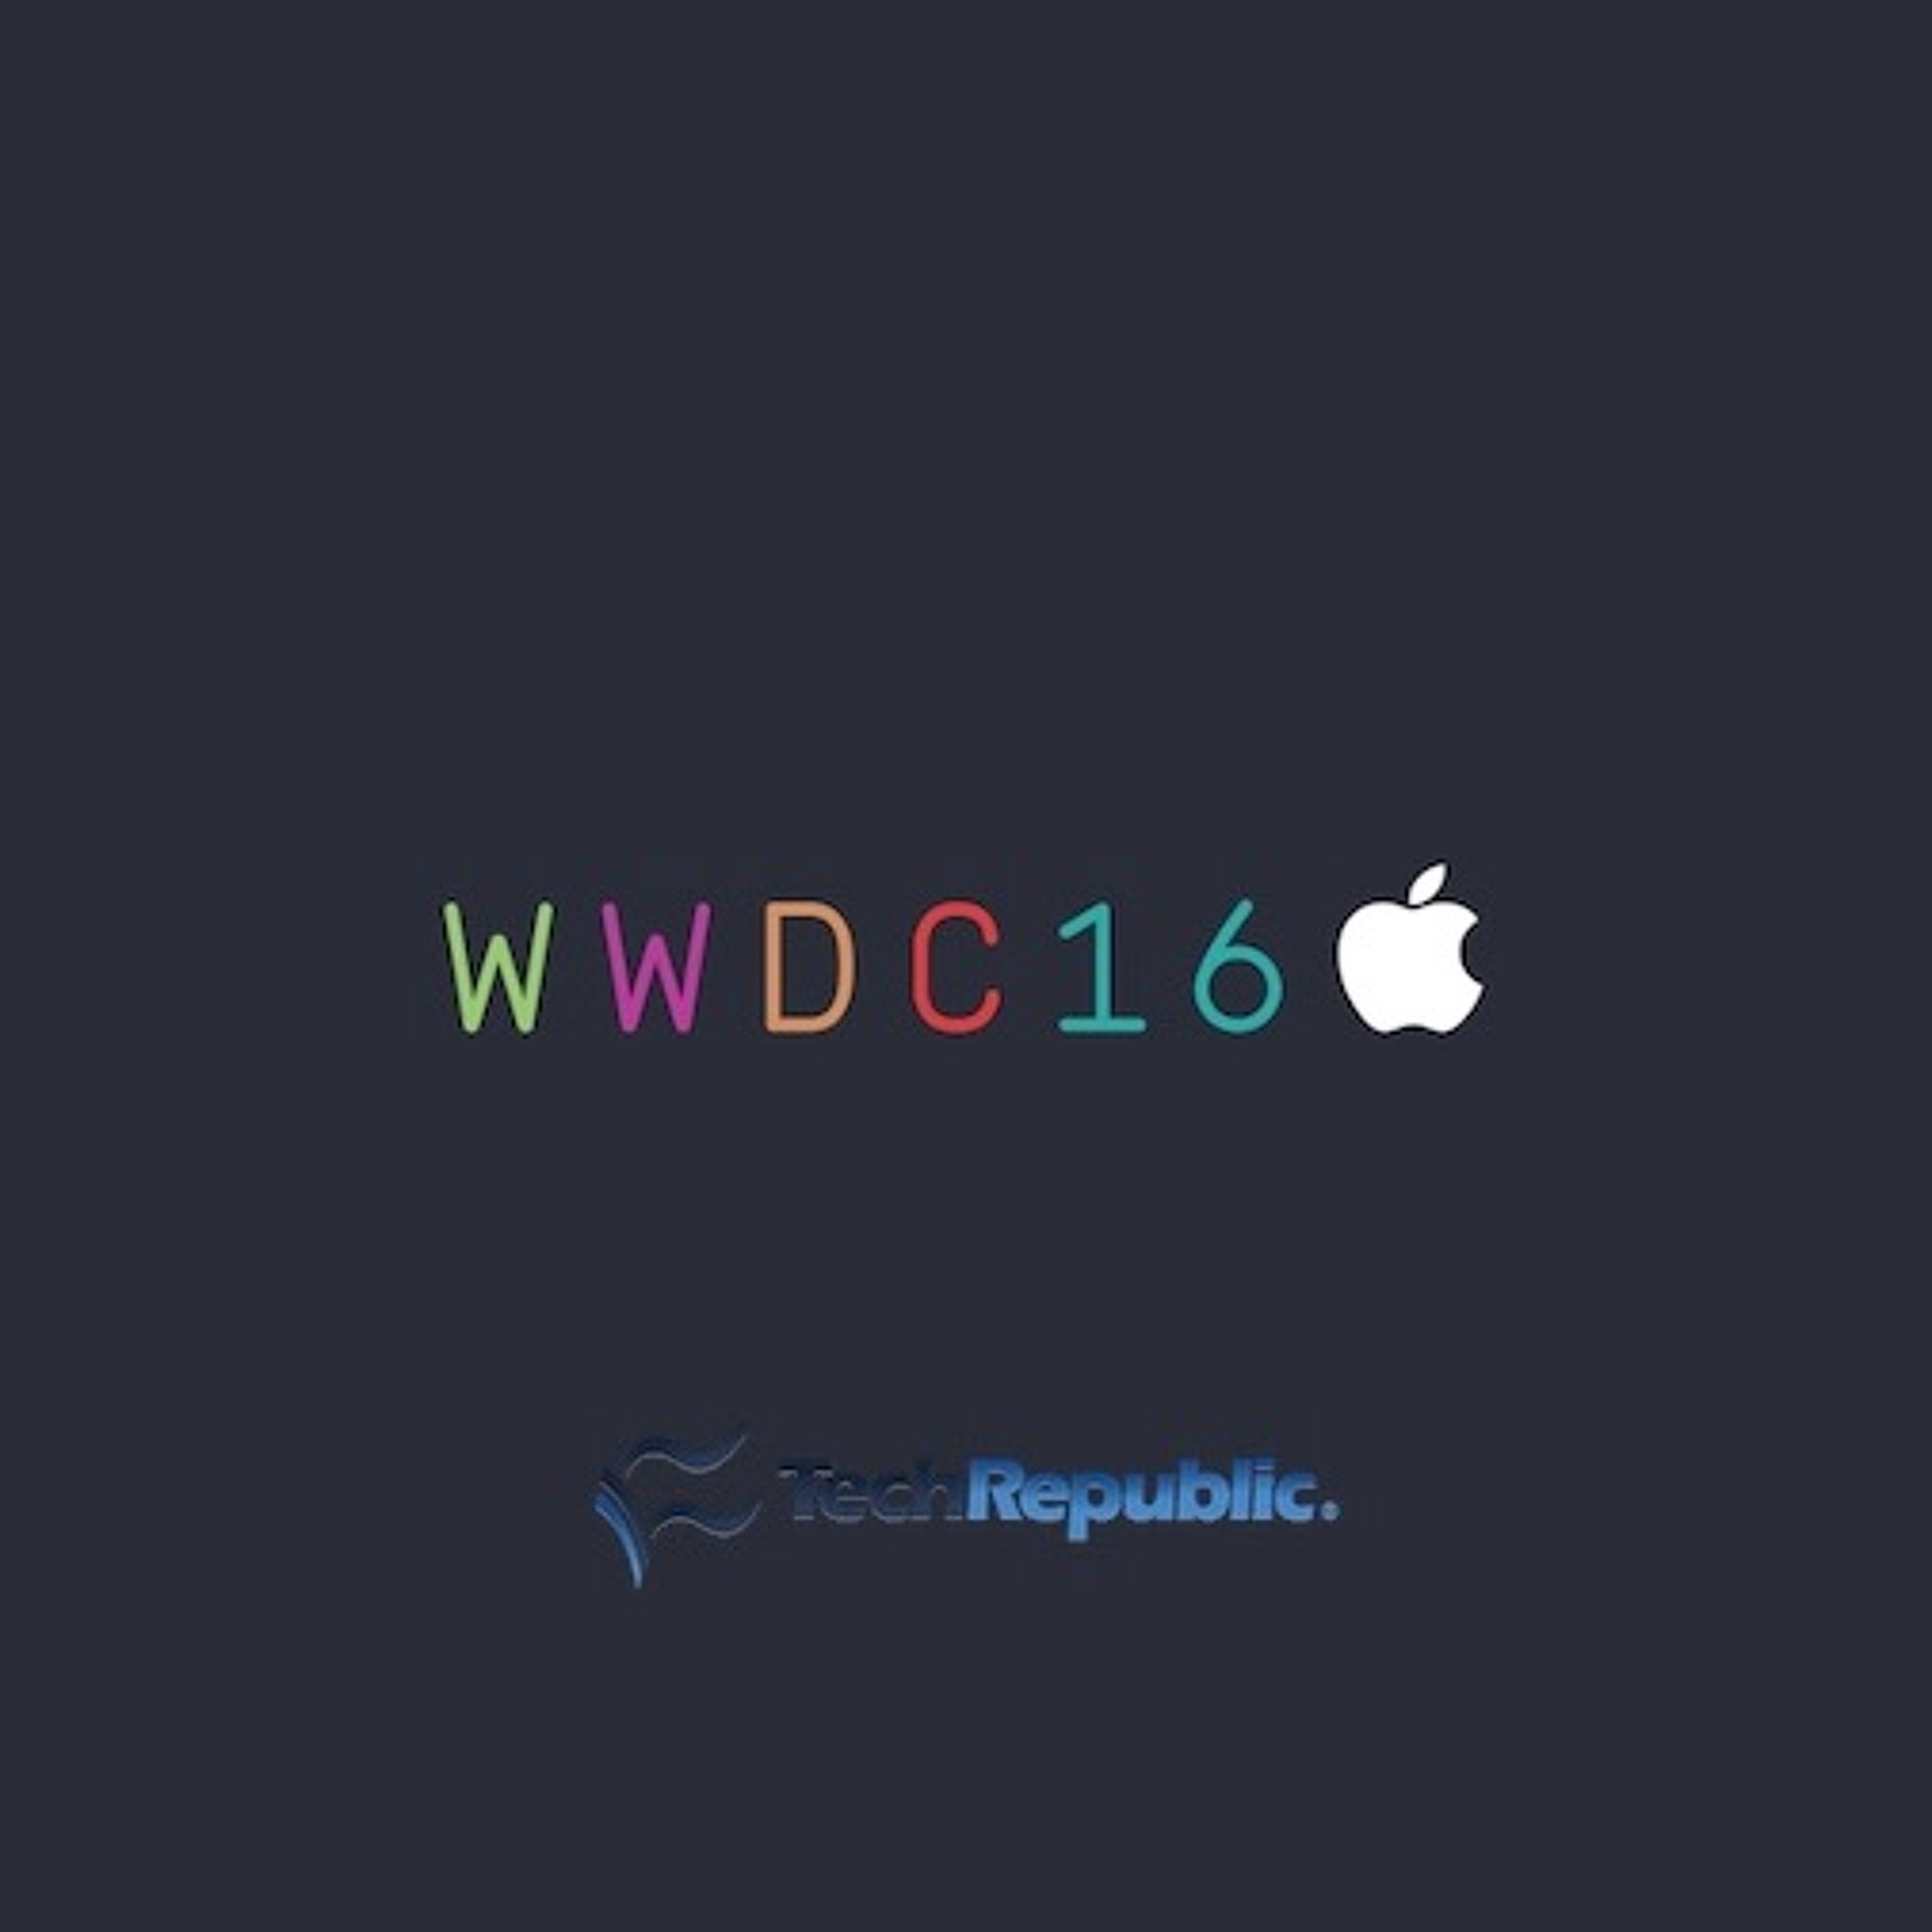 Is Apple Doomed? TechRepublic's Business Technology Weekly Roundtable Discussion